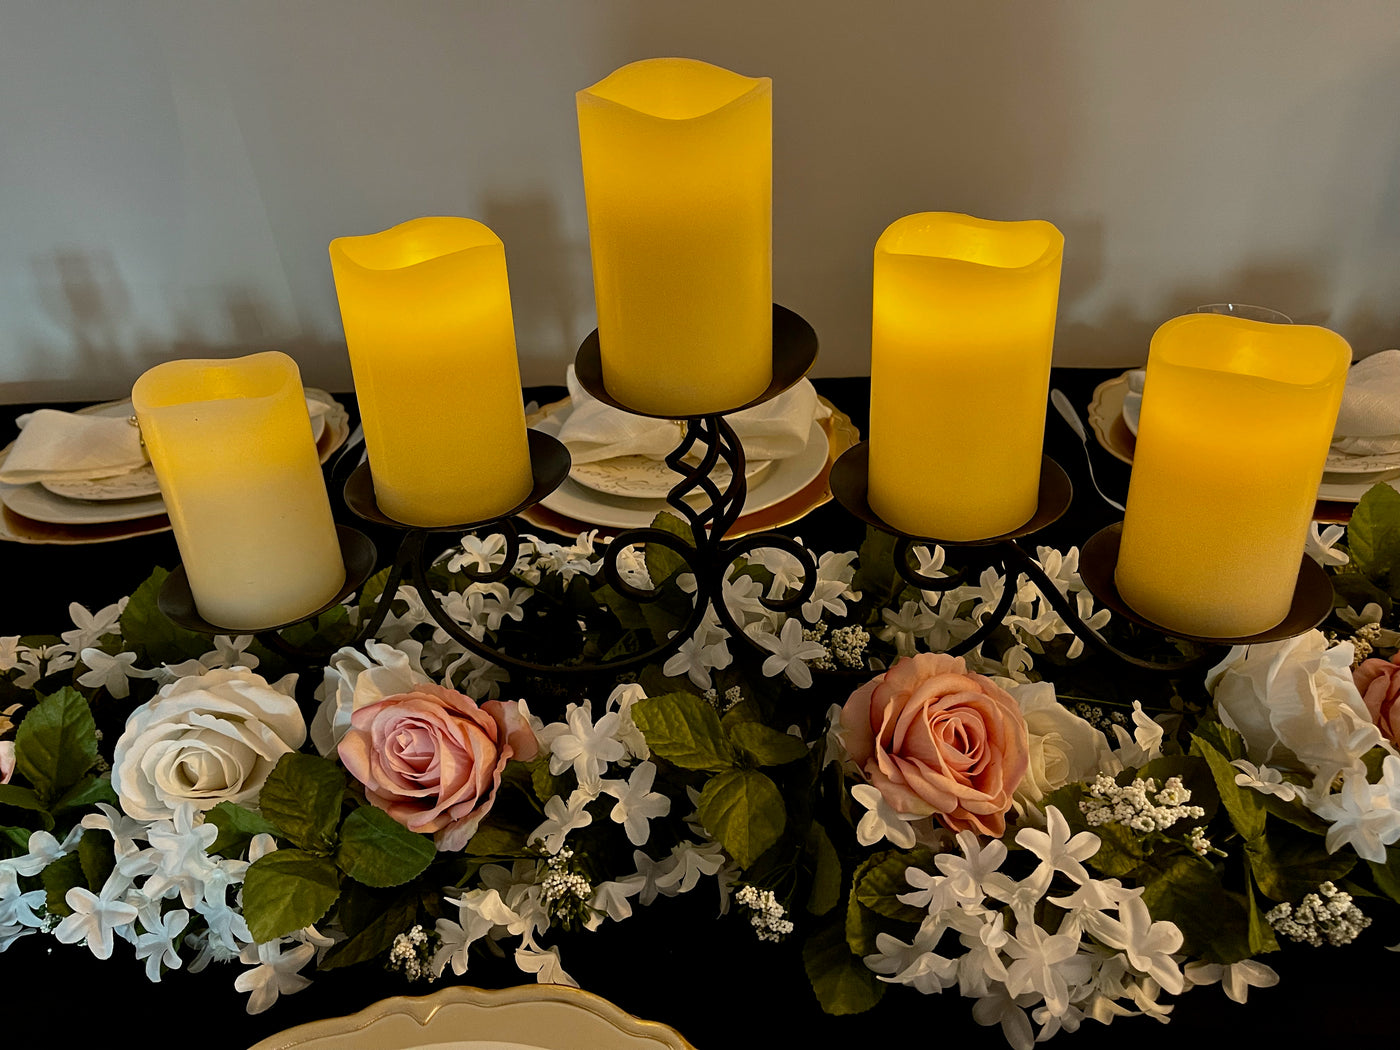 Black wrought iron candelabra including five LED remote controlled candles. One button turns all candles on and off, setting the mood perfectly for your event.